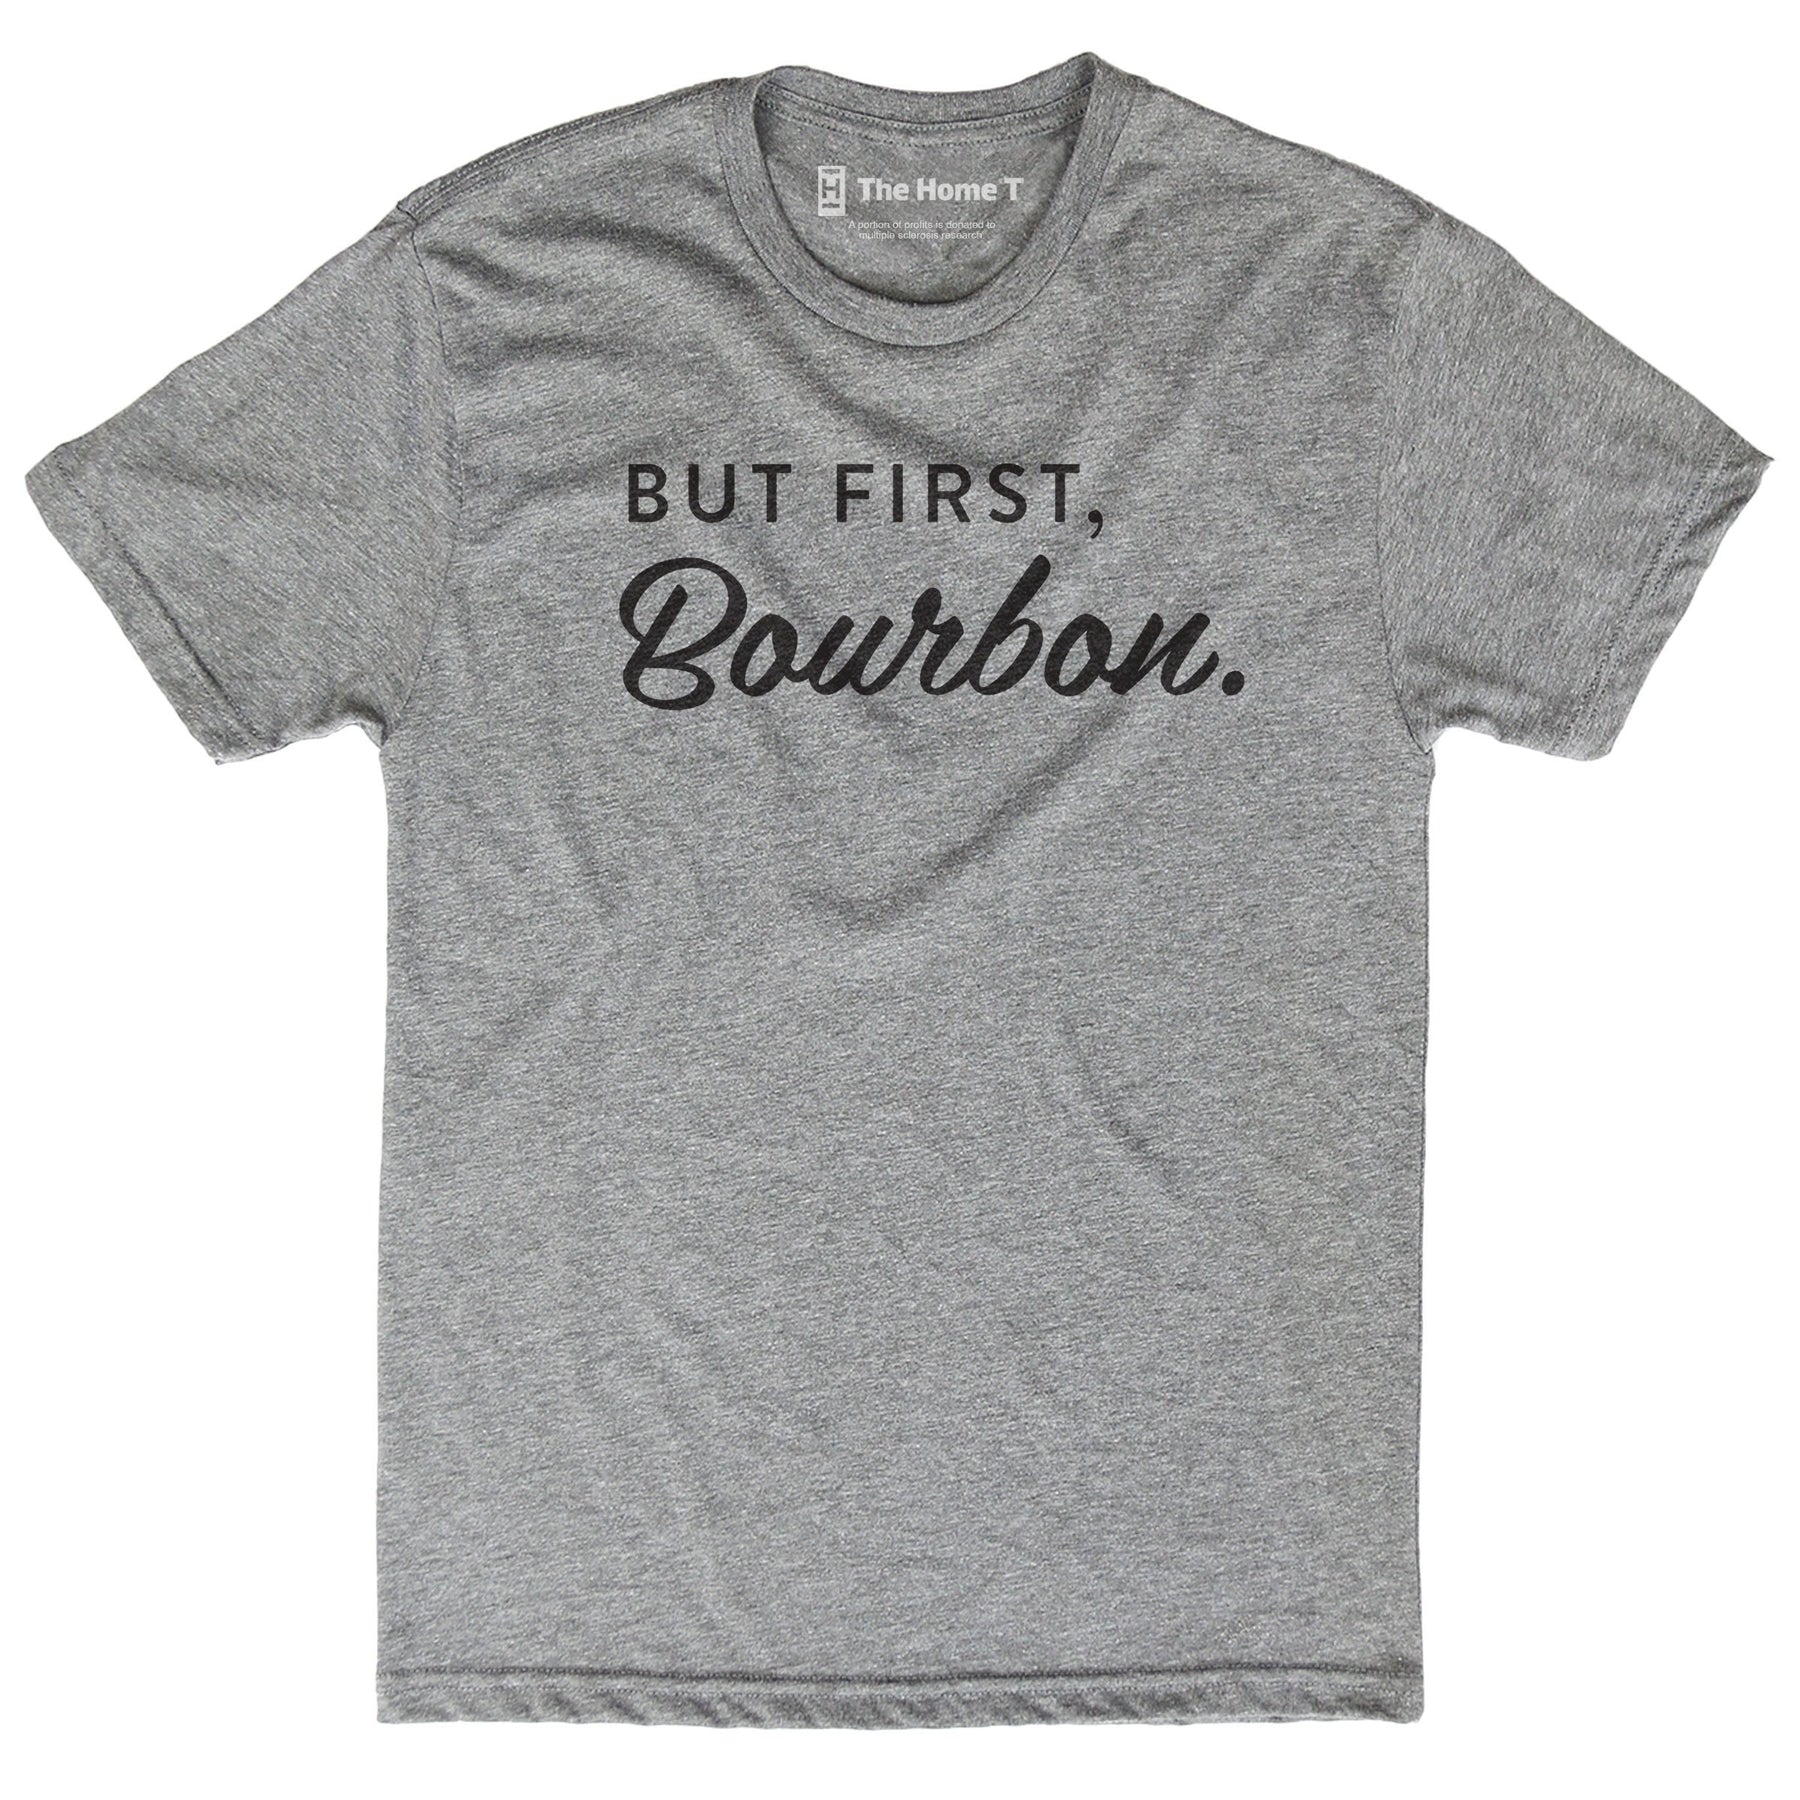 But First, Bourbon Shirts The Home T XS Athletic Grey Crew Neck